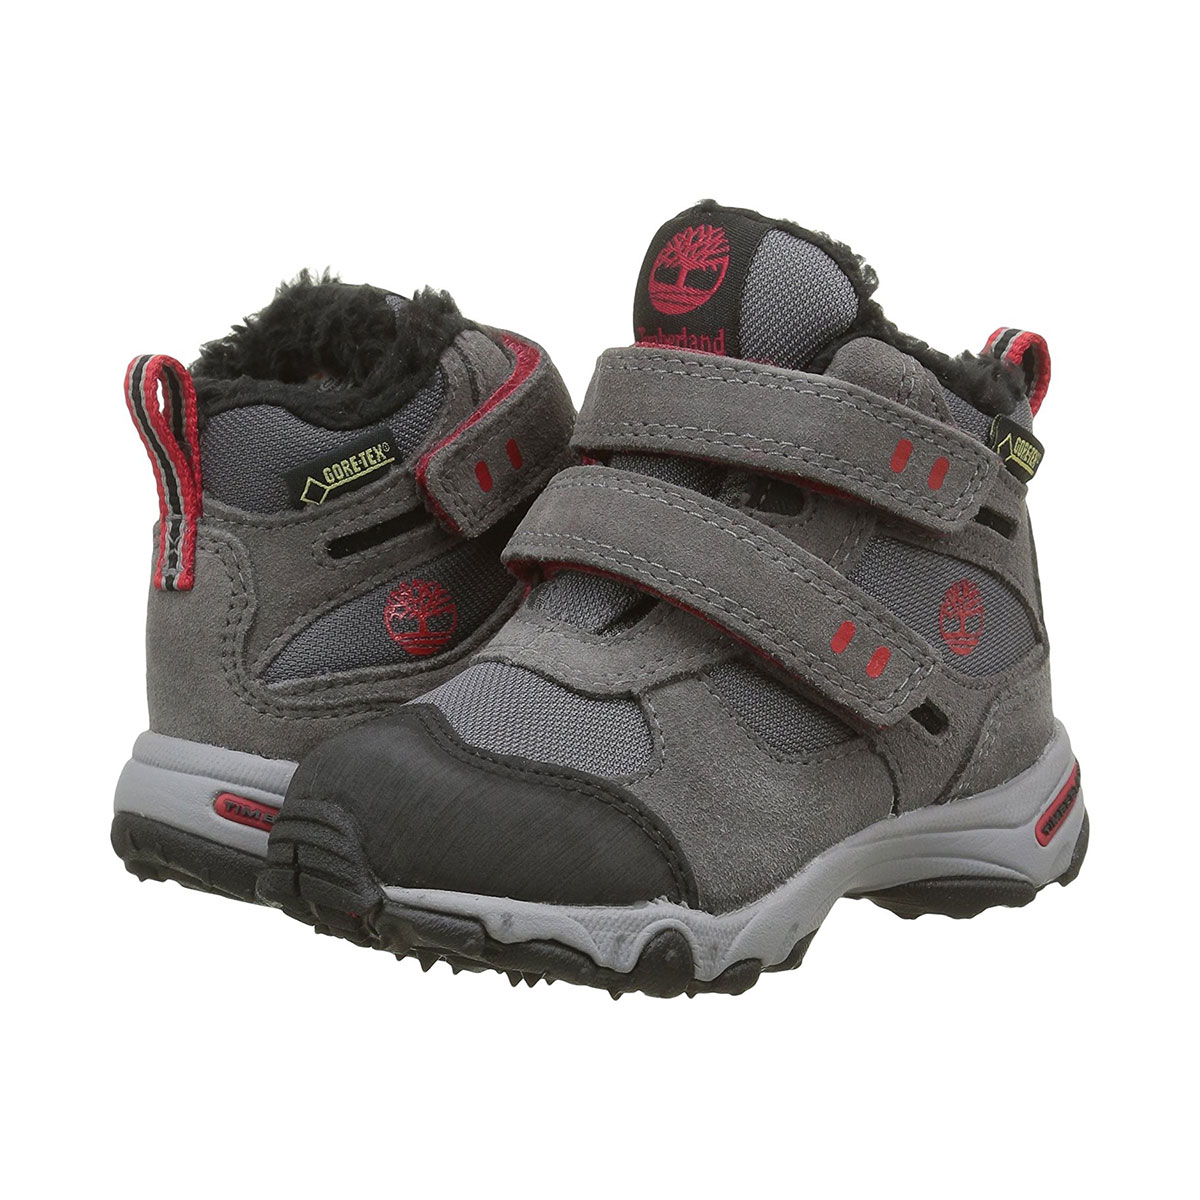 Timberland Ossipee 2 Strap Gore-Tex grey  A1A5D